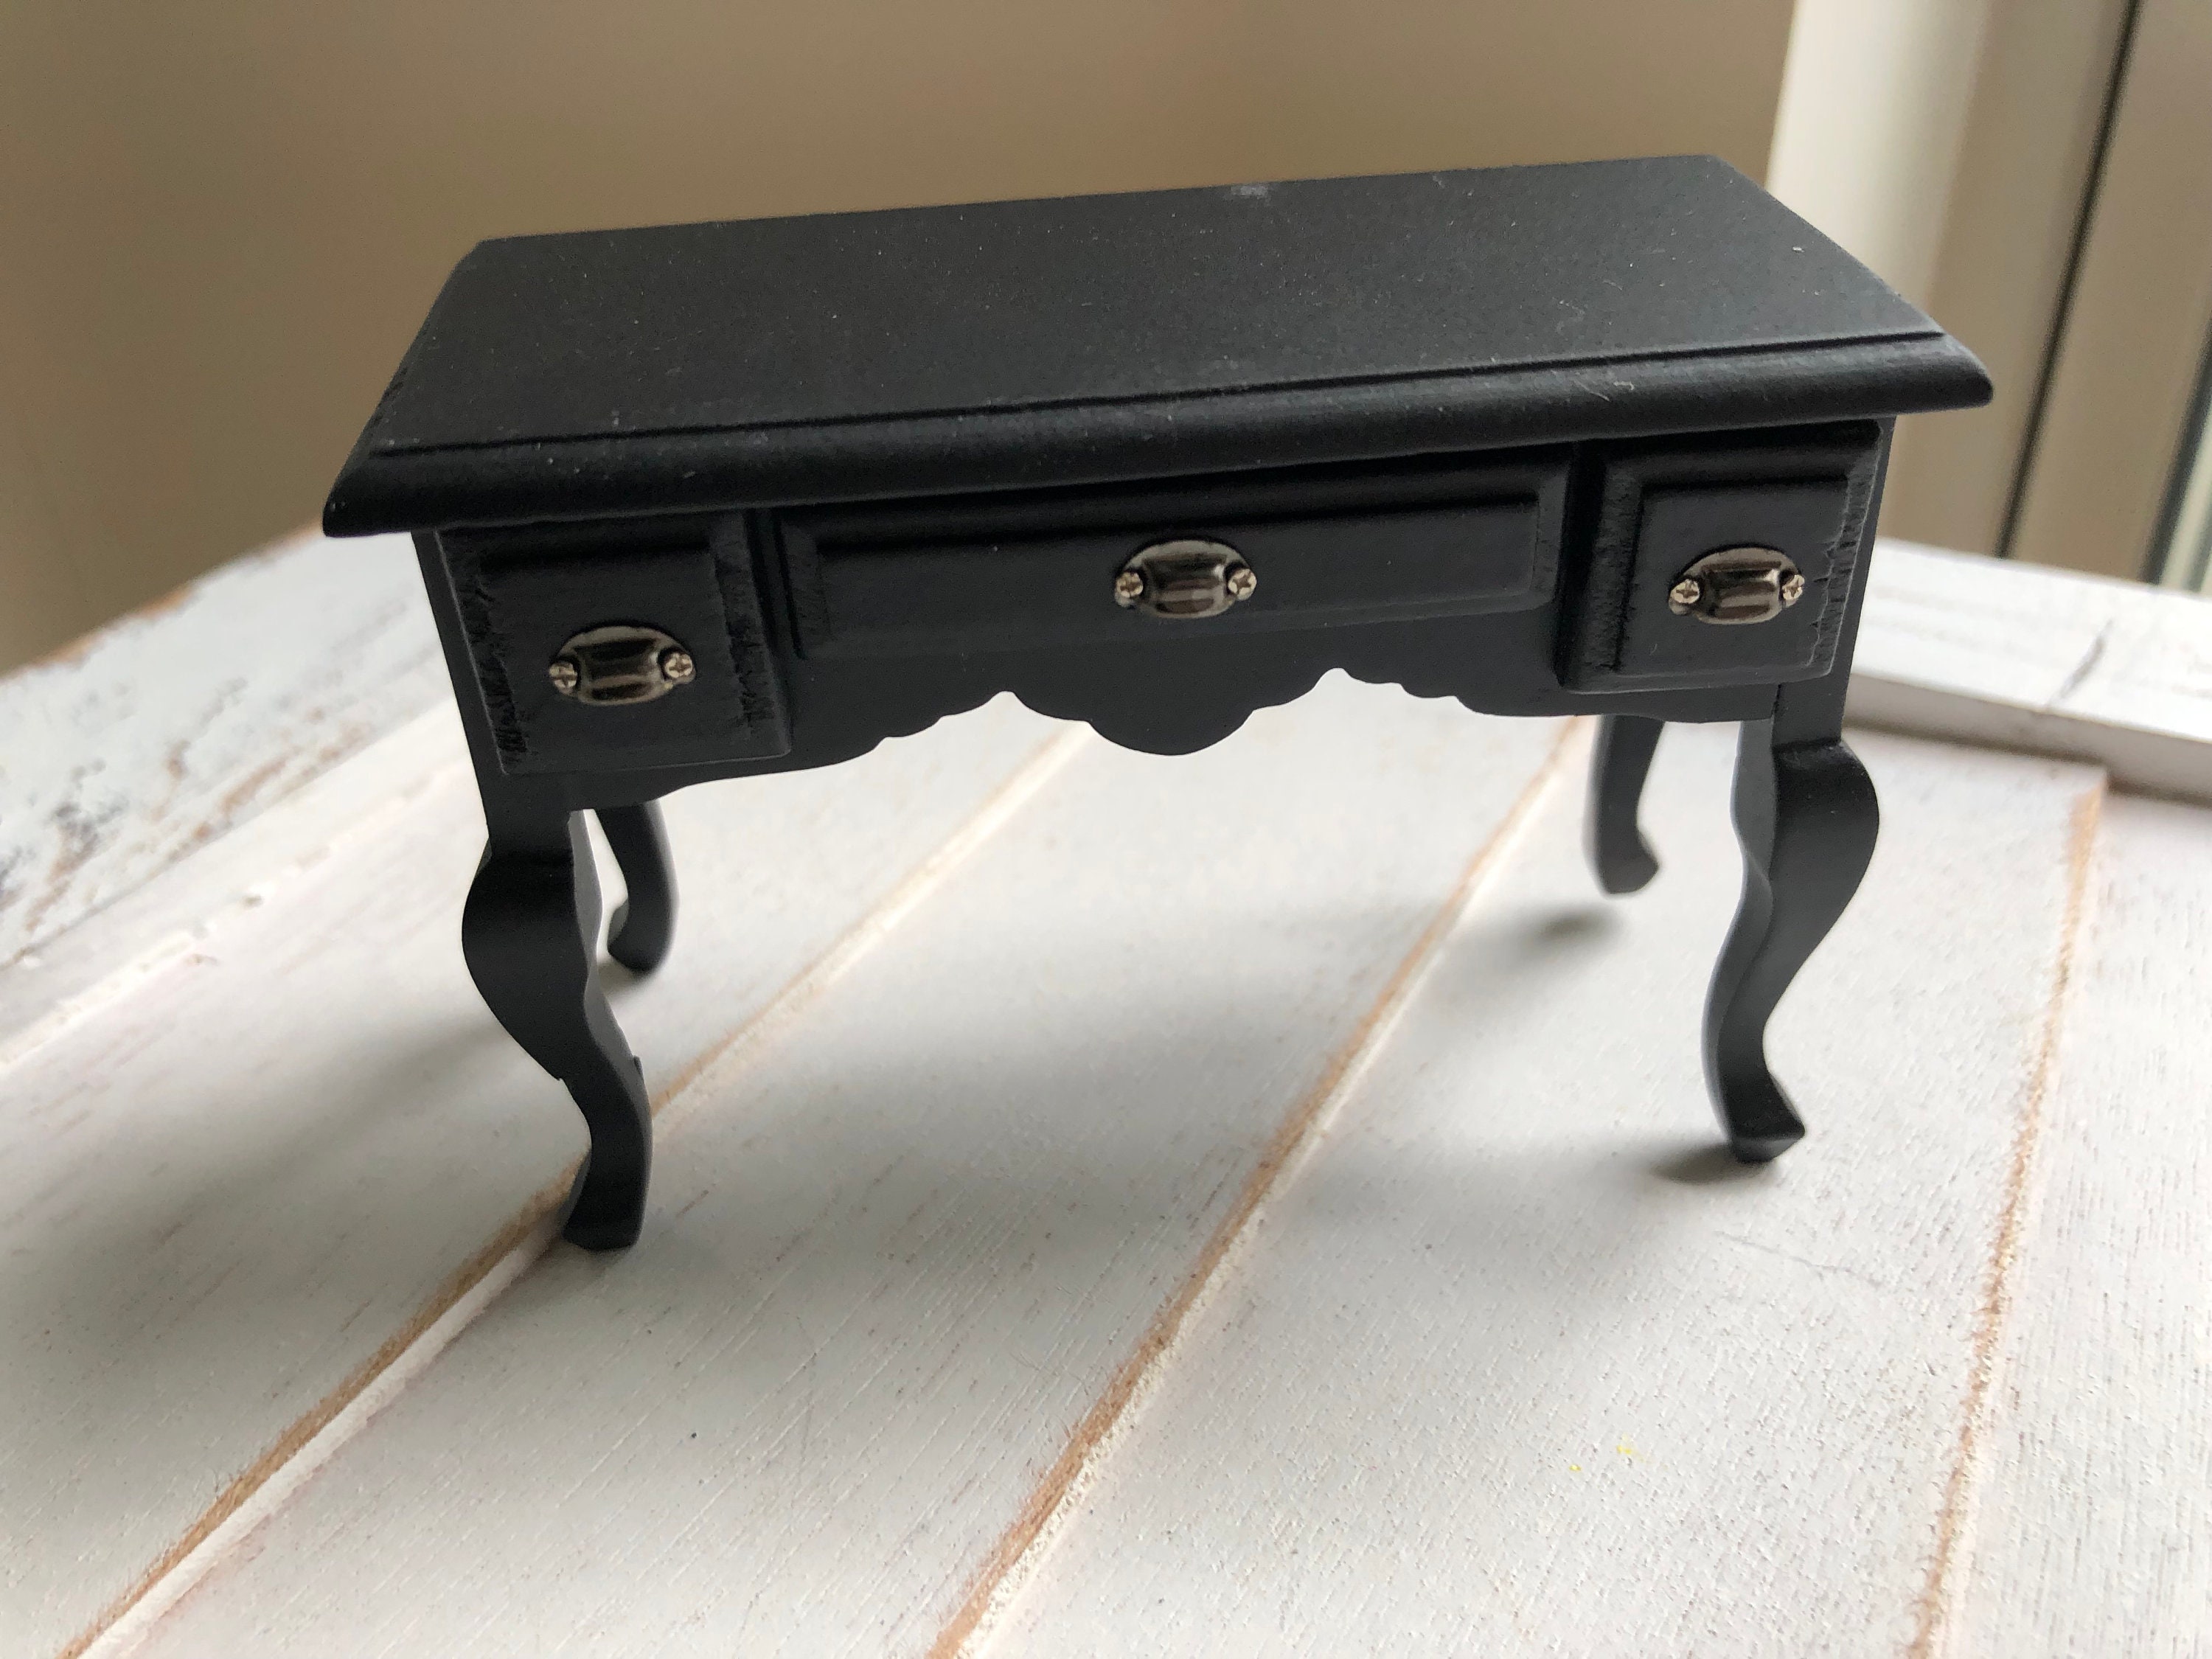 Details about    Miniature Dollhouse Wood Desk With Pewter Hardware Black 1:12 Scale New 